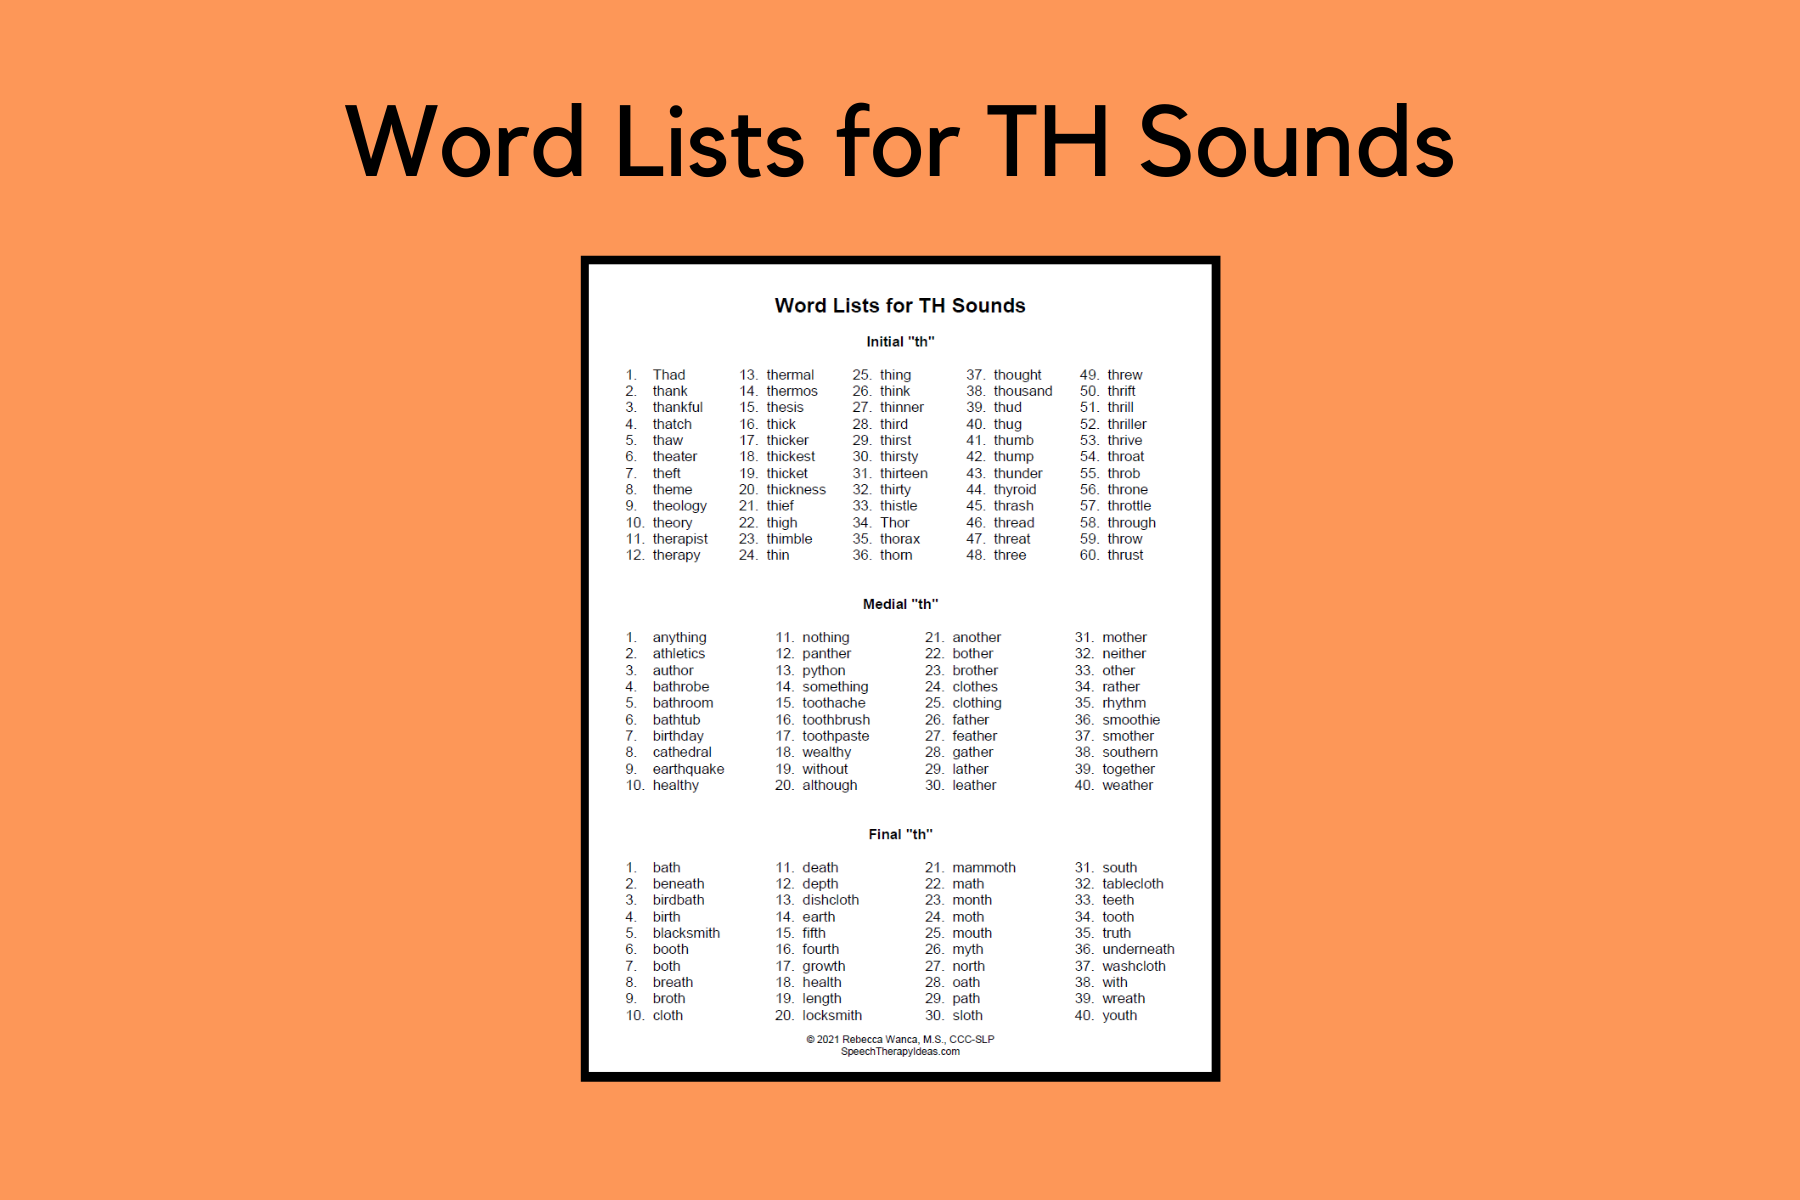 Word Lists for TH Sounds